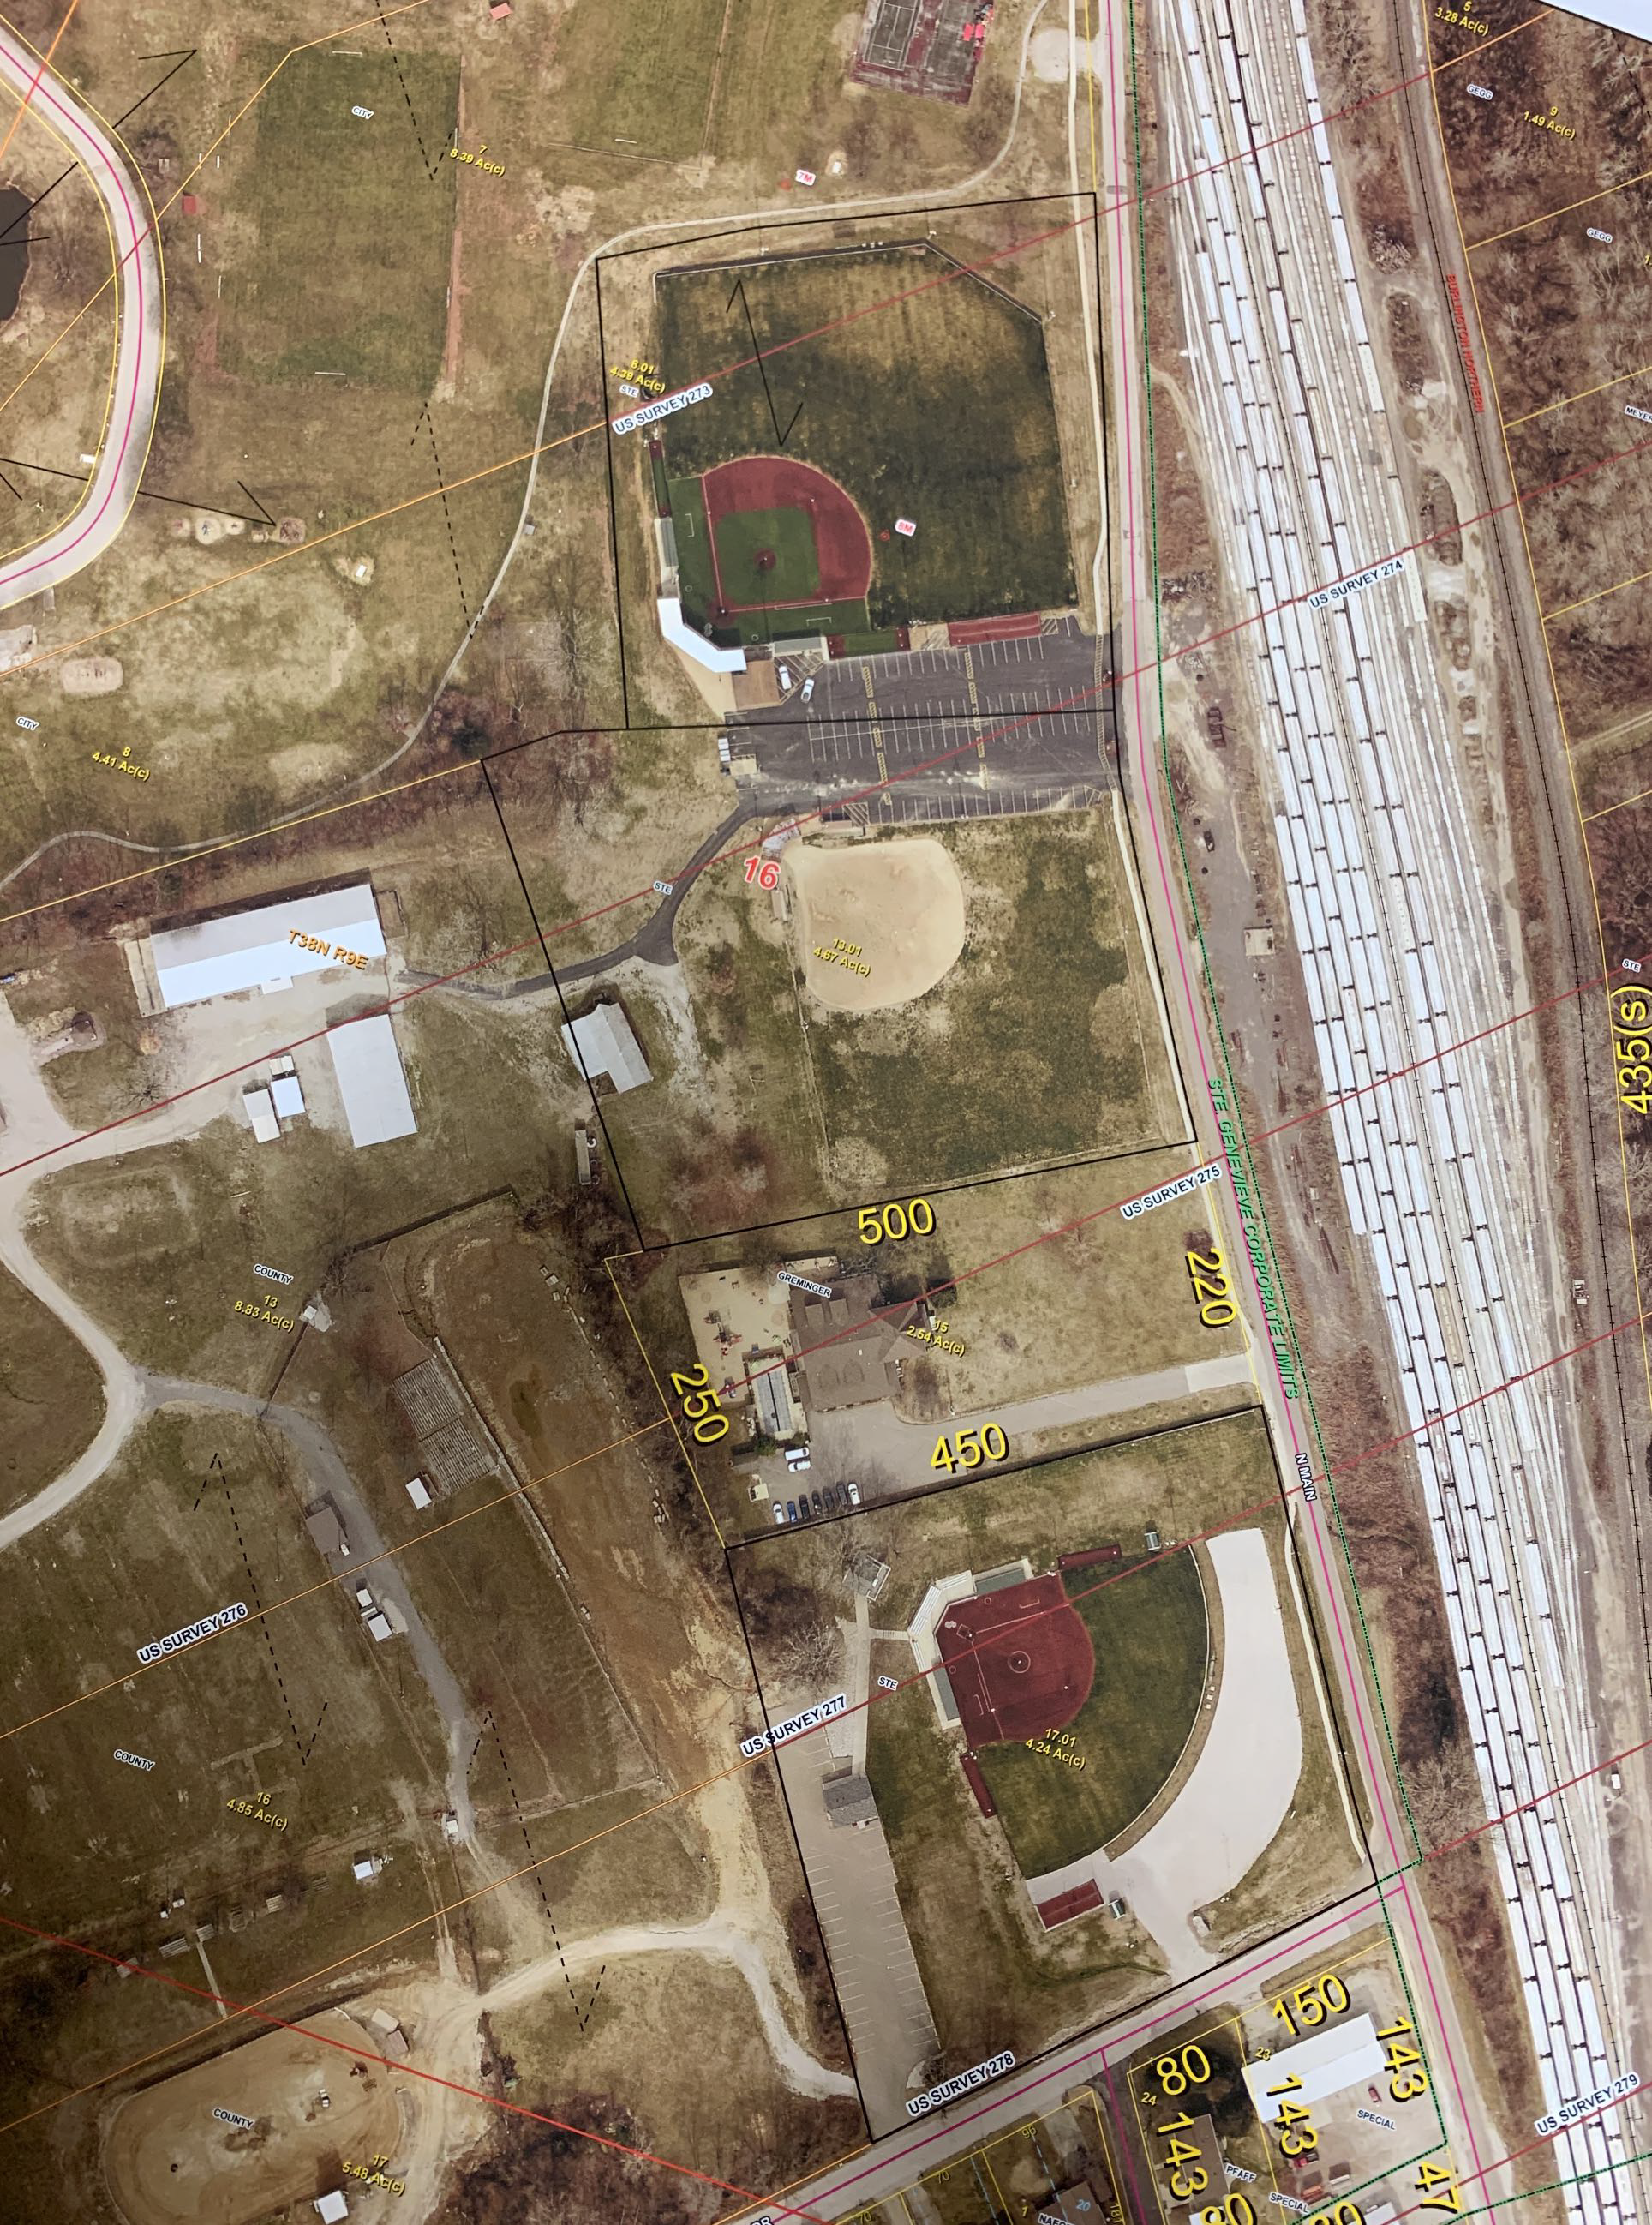 Aerial image of Yanks and Leon's ball fields with district's property lines